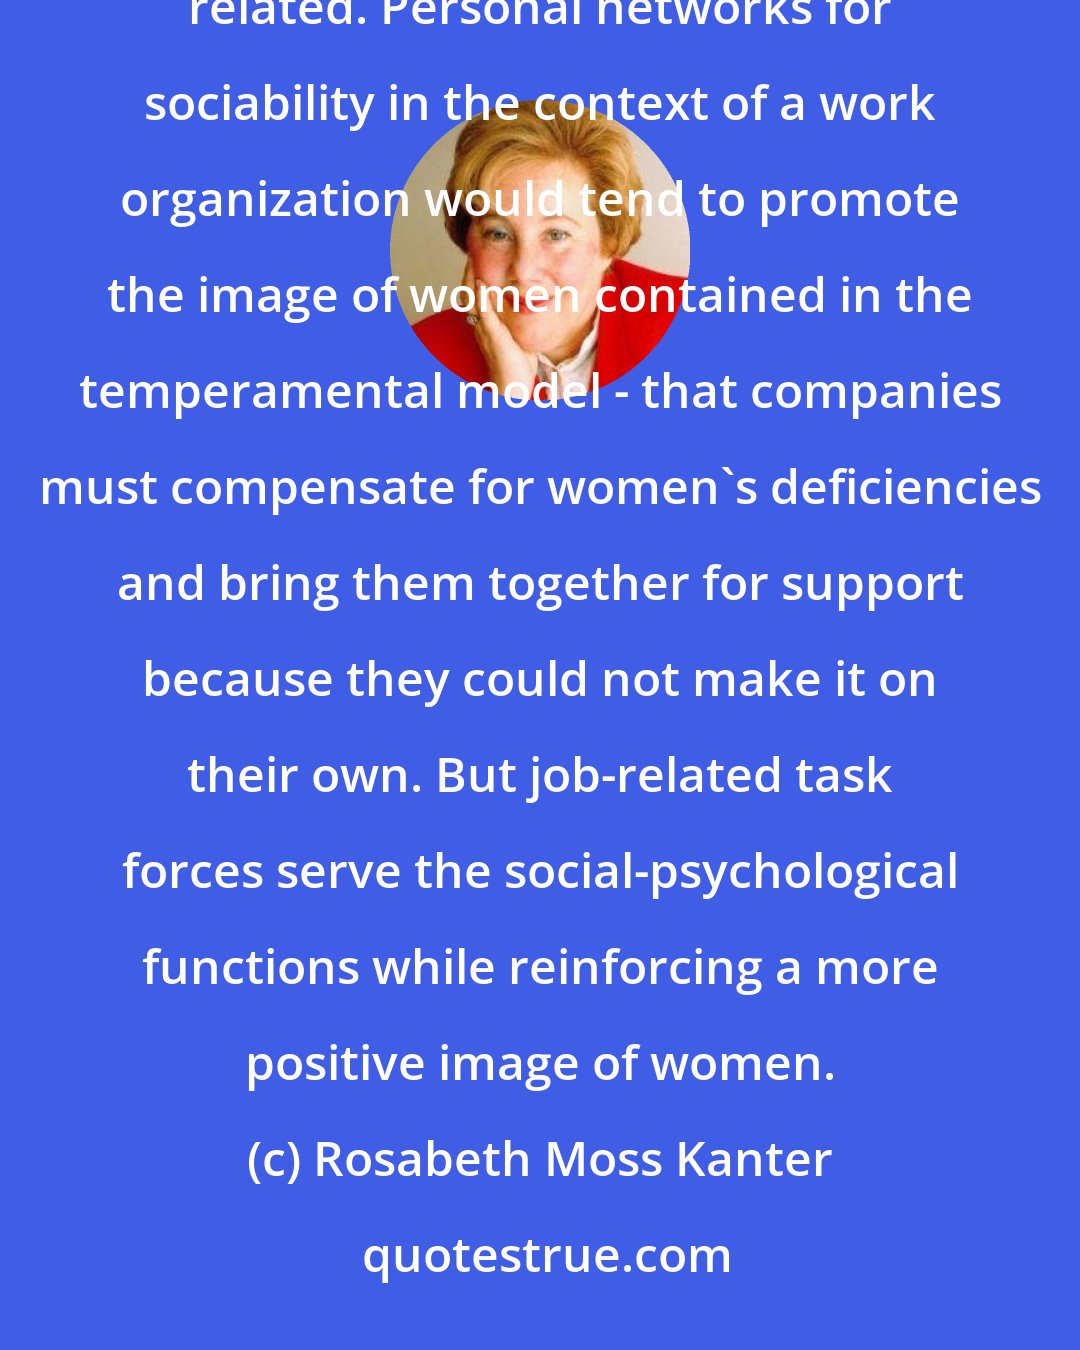 Rosabeth Moss Kanter: if networks of women are formed, they should be job related and task related rather than female-concerns related. Personal networks for sociability in the context of a work organization would tend to promote the image of women contained in the temperamental model - that companies must compensate for women's deficiencies and bring them together for support because they could not make it on their own. But job-related task forces serve the social-psychological functions while reinforcing a more positive image of women.